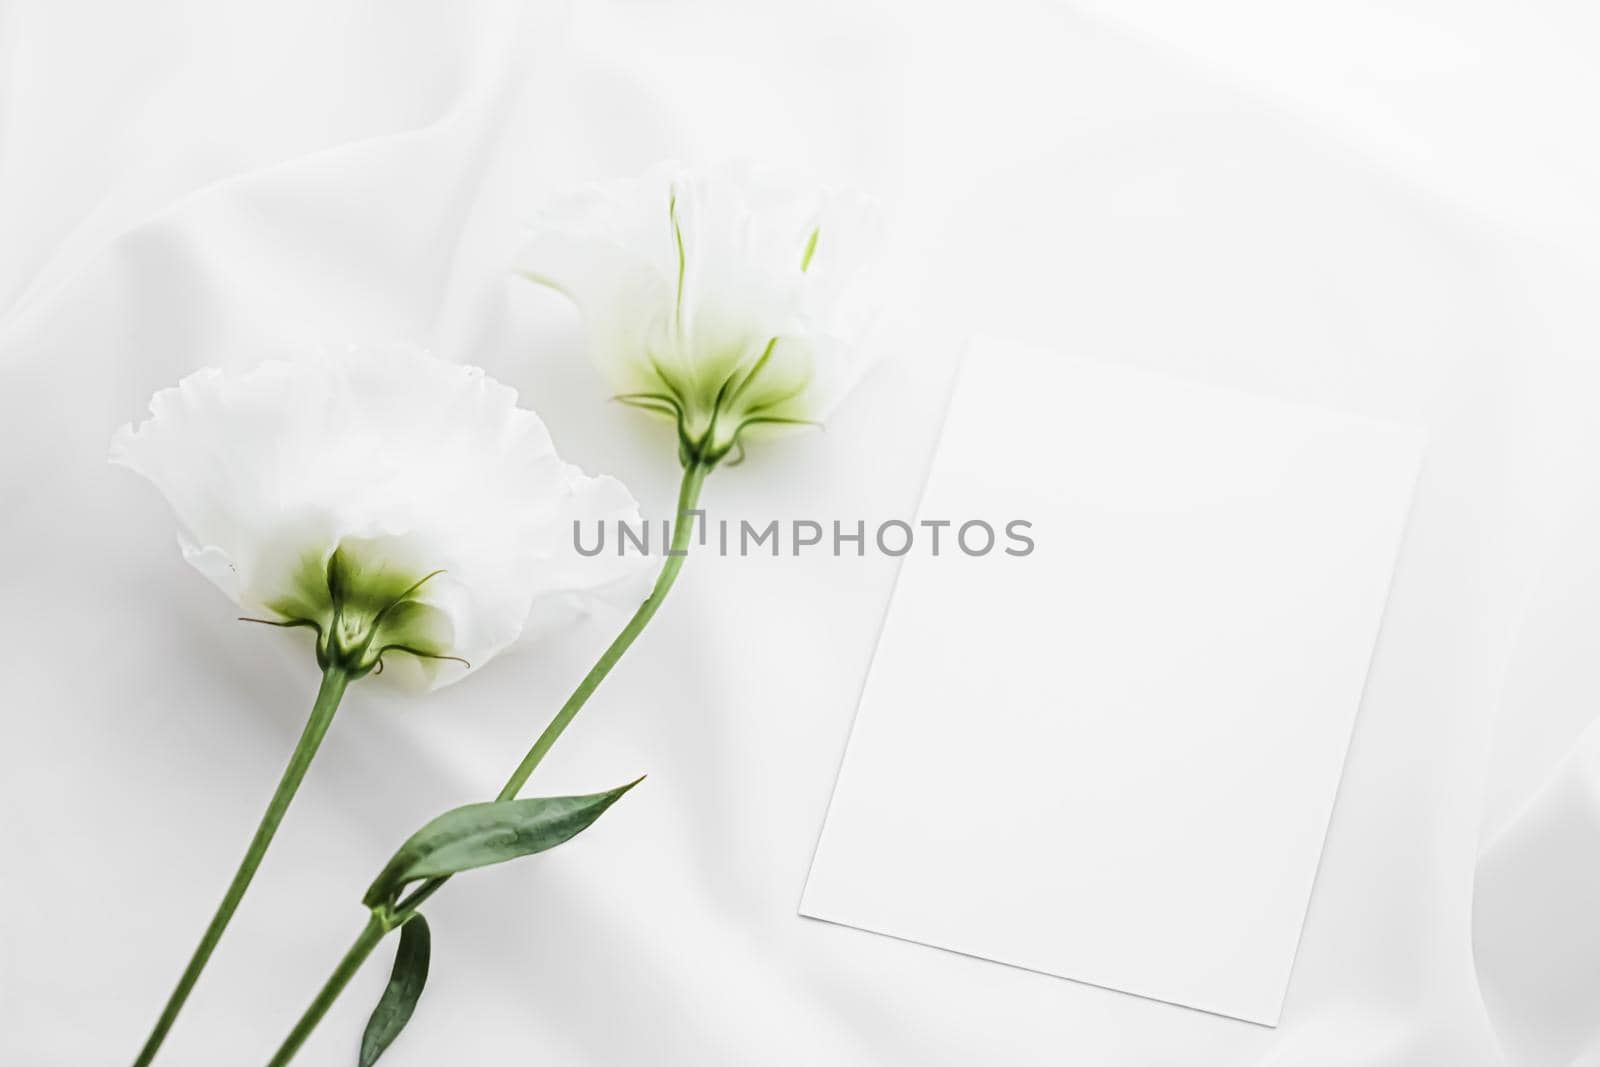 Wedding invitation and white rose flowers on silk fabric as bridal flatlay background, blank paper greeting card and holiday branding, flat lay design concept